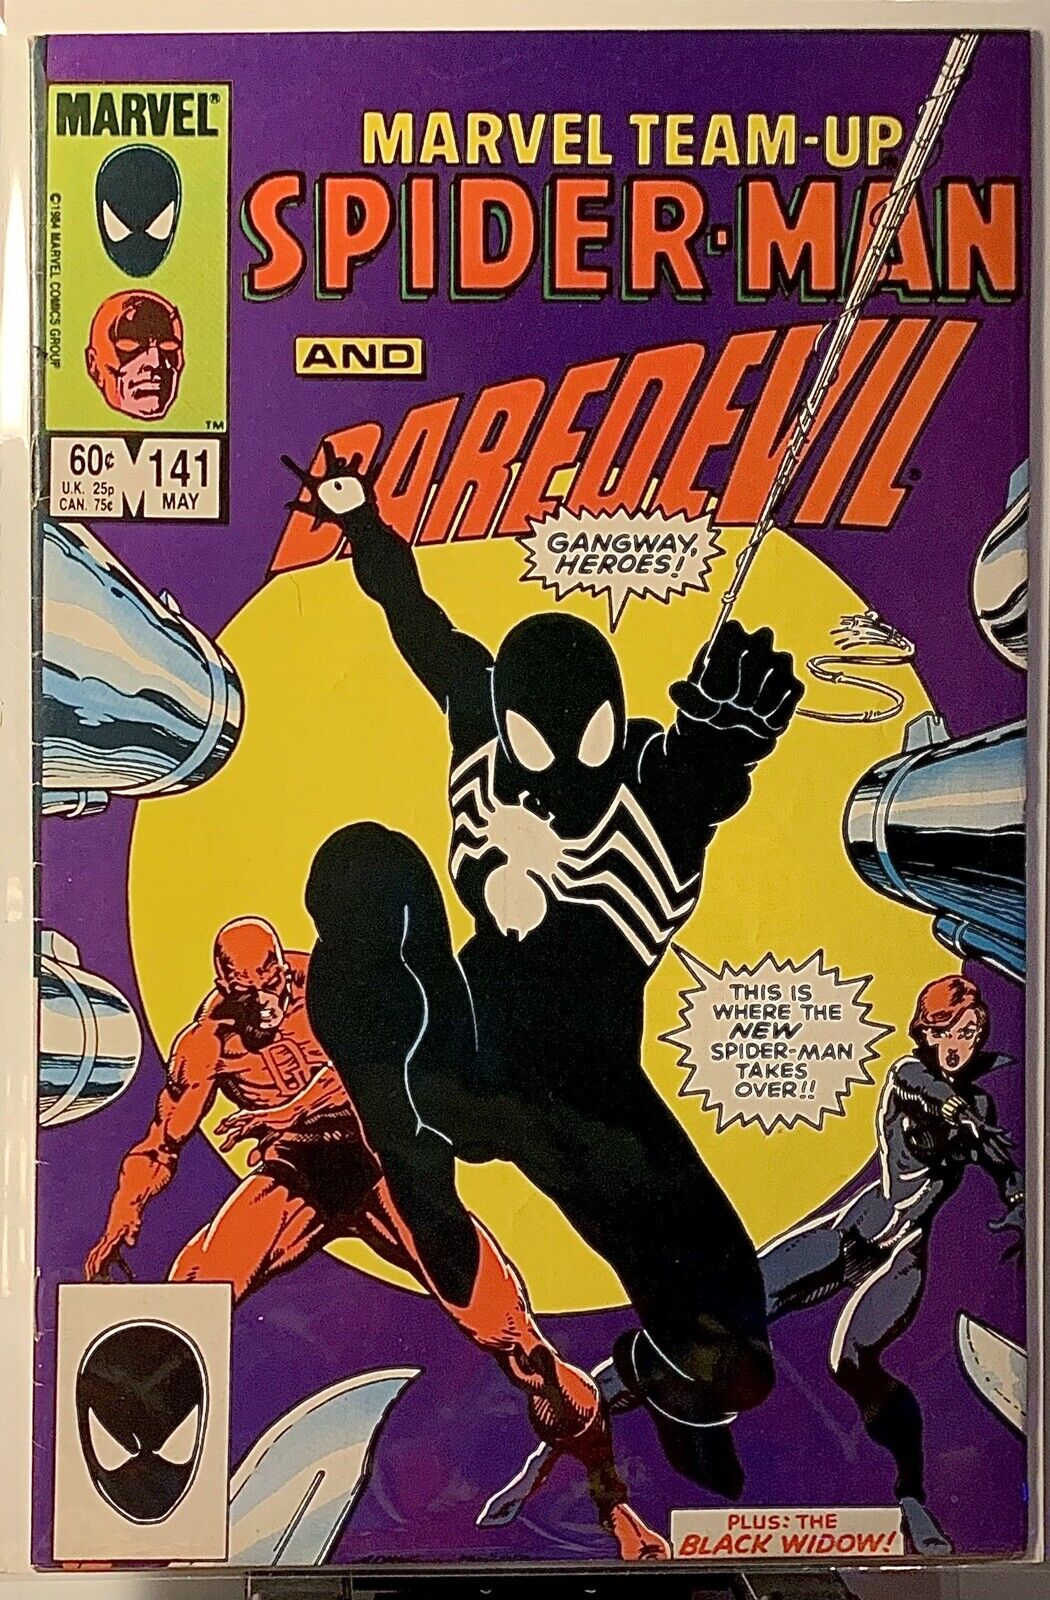 MARVEL TEAM-UP #141 SPIDER-MAN AND DAREDEVIL (TIED FOR 2nd BLACK SUIT SYMBIOTE)